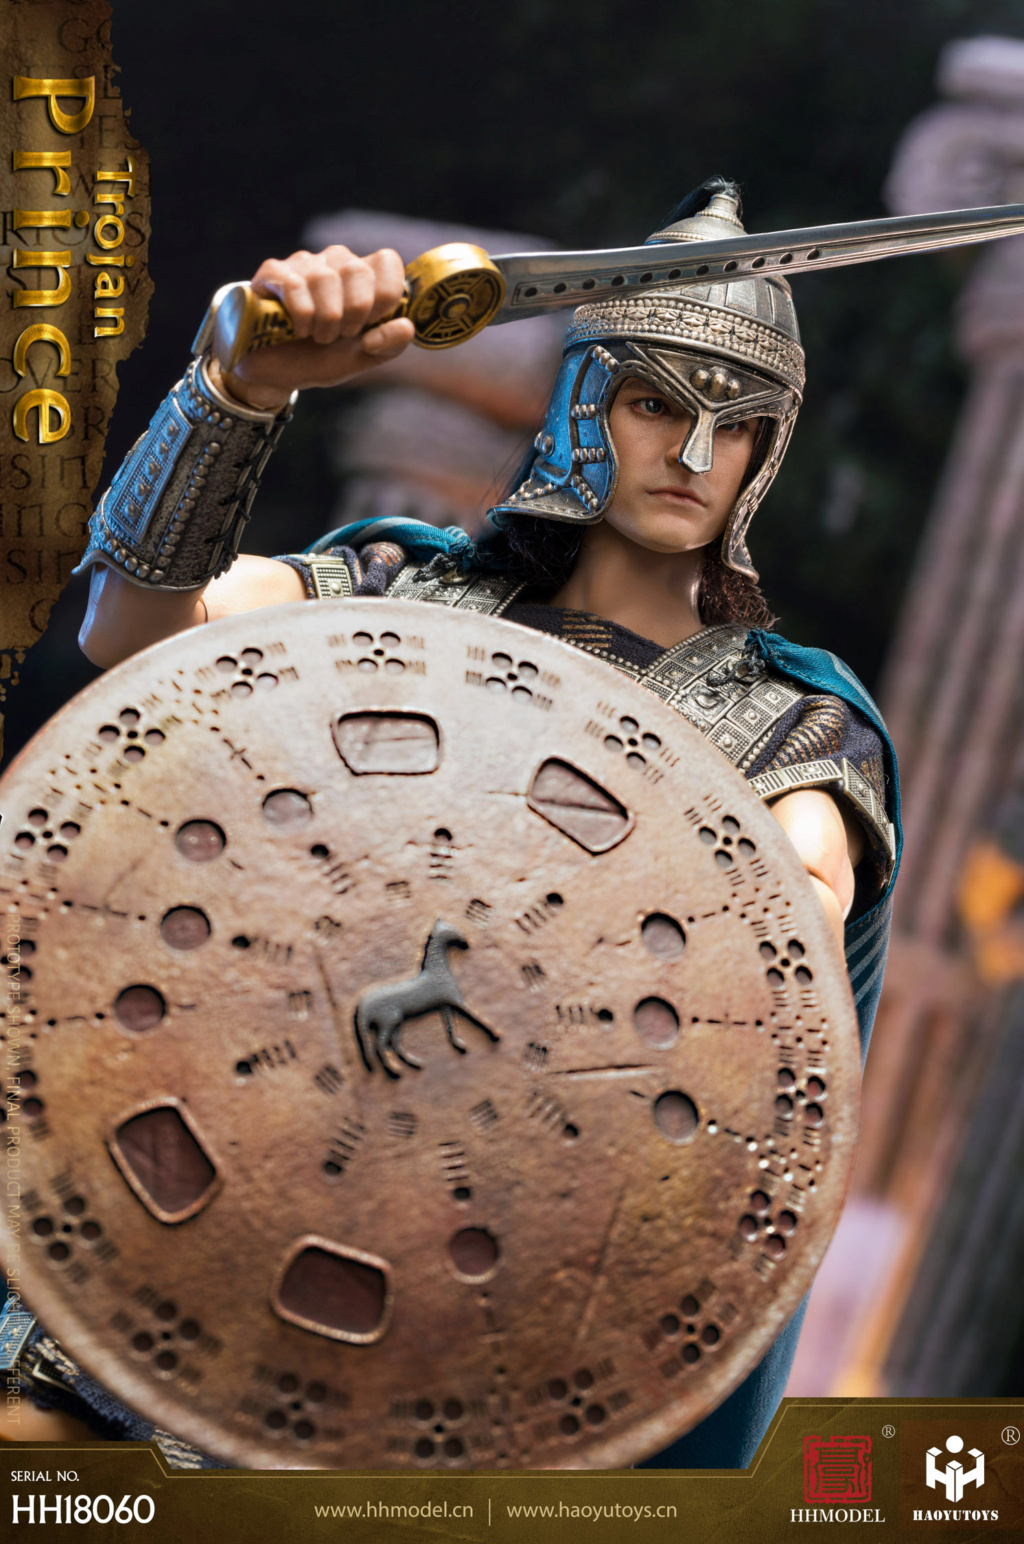 TroyPrince - NEW PRODUCT: HHMODEL & HAOYUTOYS: 1/6 Empire Legion - Troy Prince Action Figure #HH18060 16281212